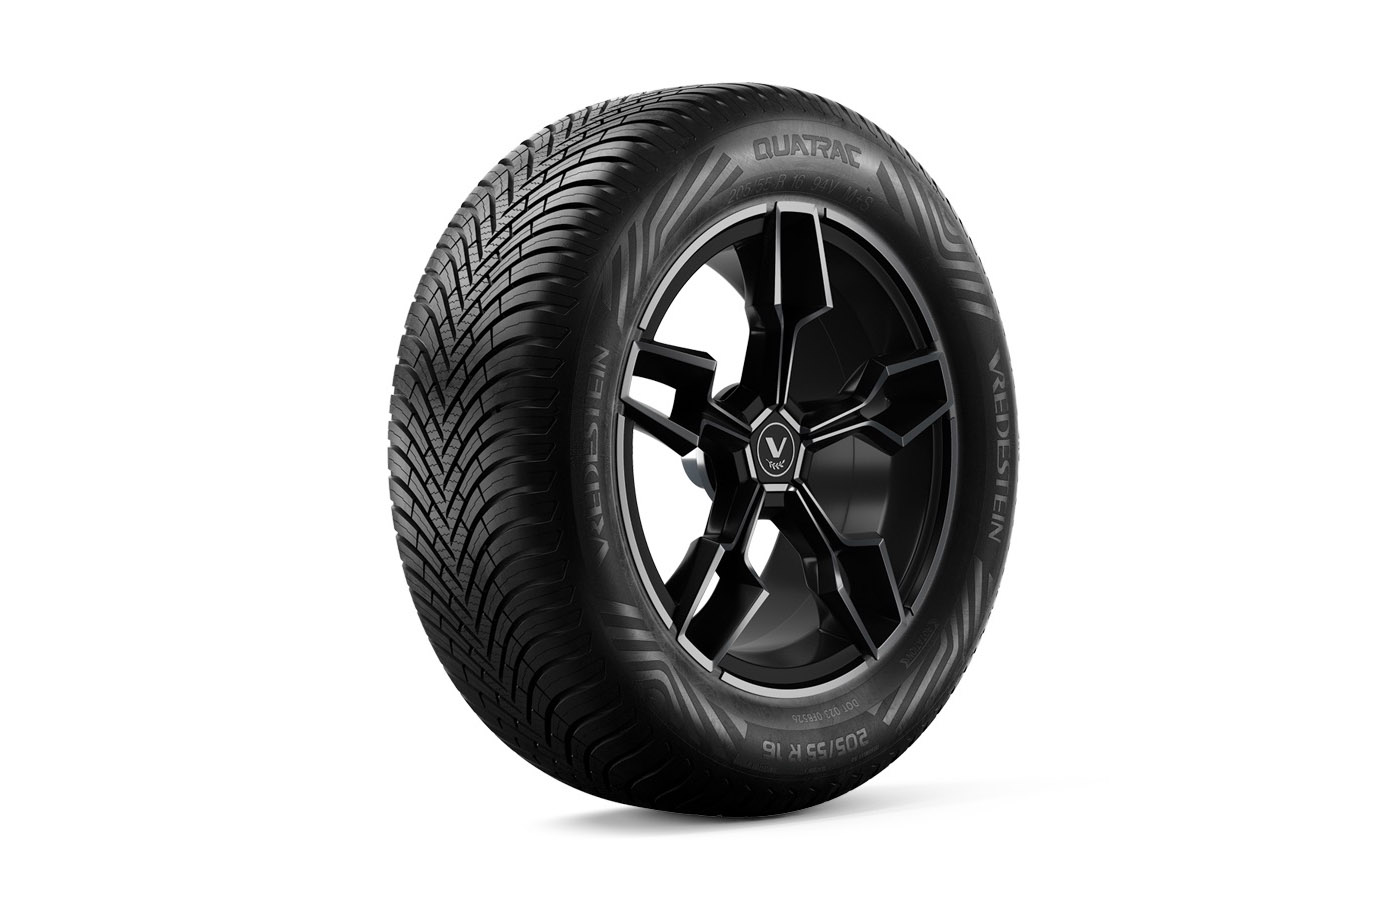 Tyre Vredestein Tests - Reviews Quatrac and